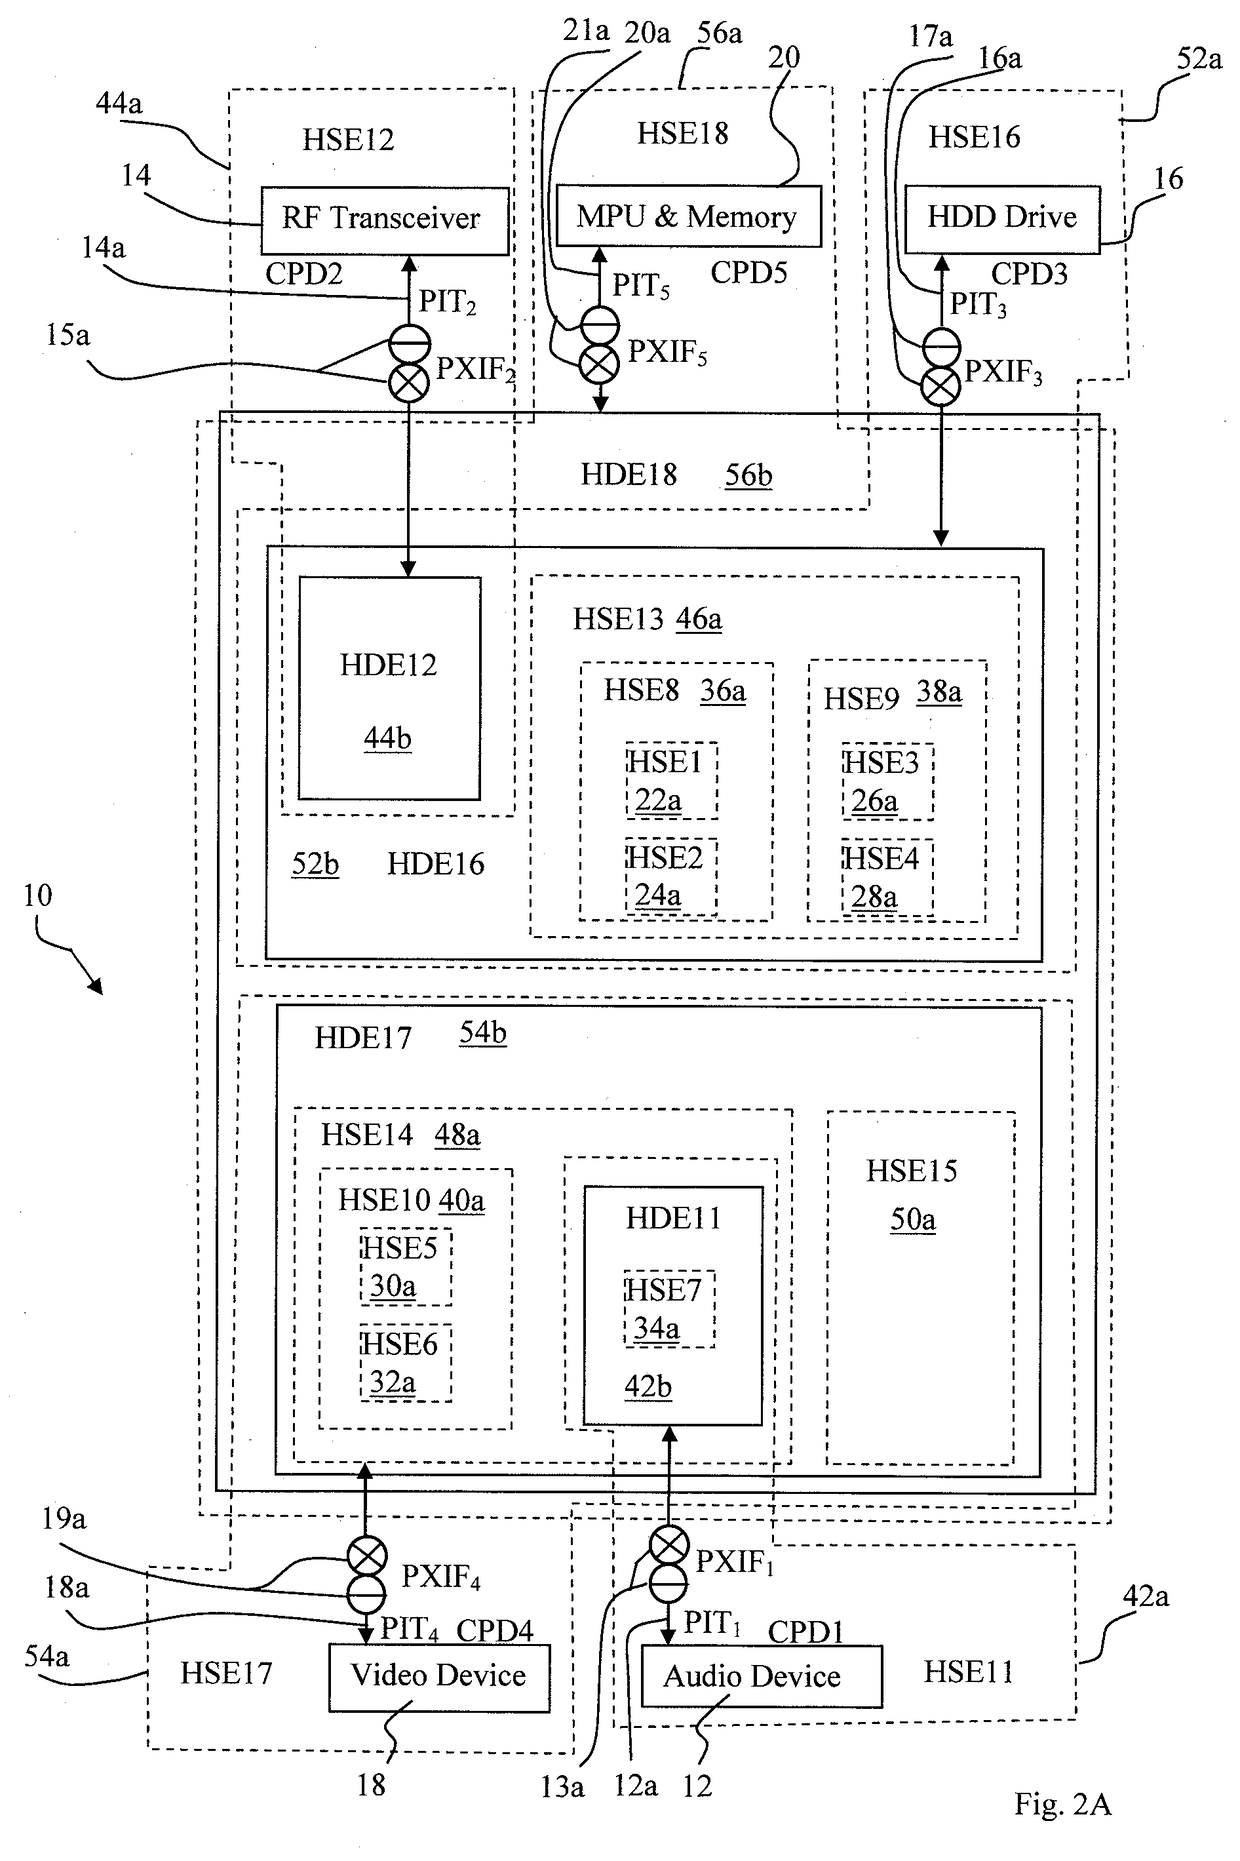 Method of progressively prototyping and validating a customer's electronic system design